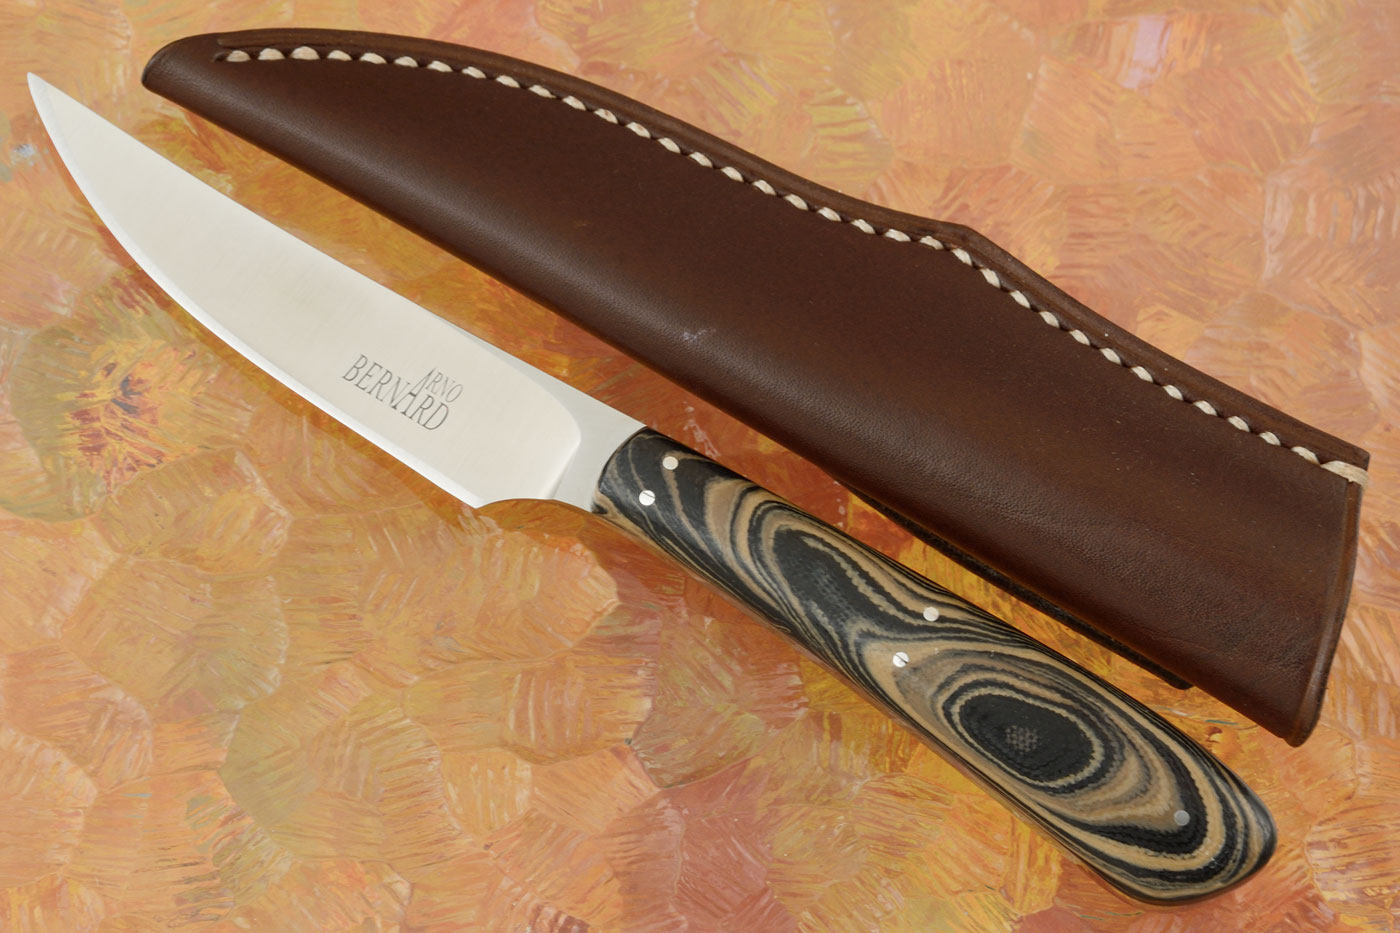 Bird & Trout with Brown/Black Camo G-10